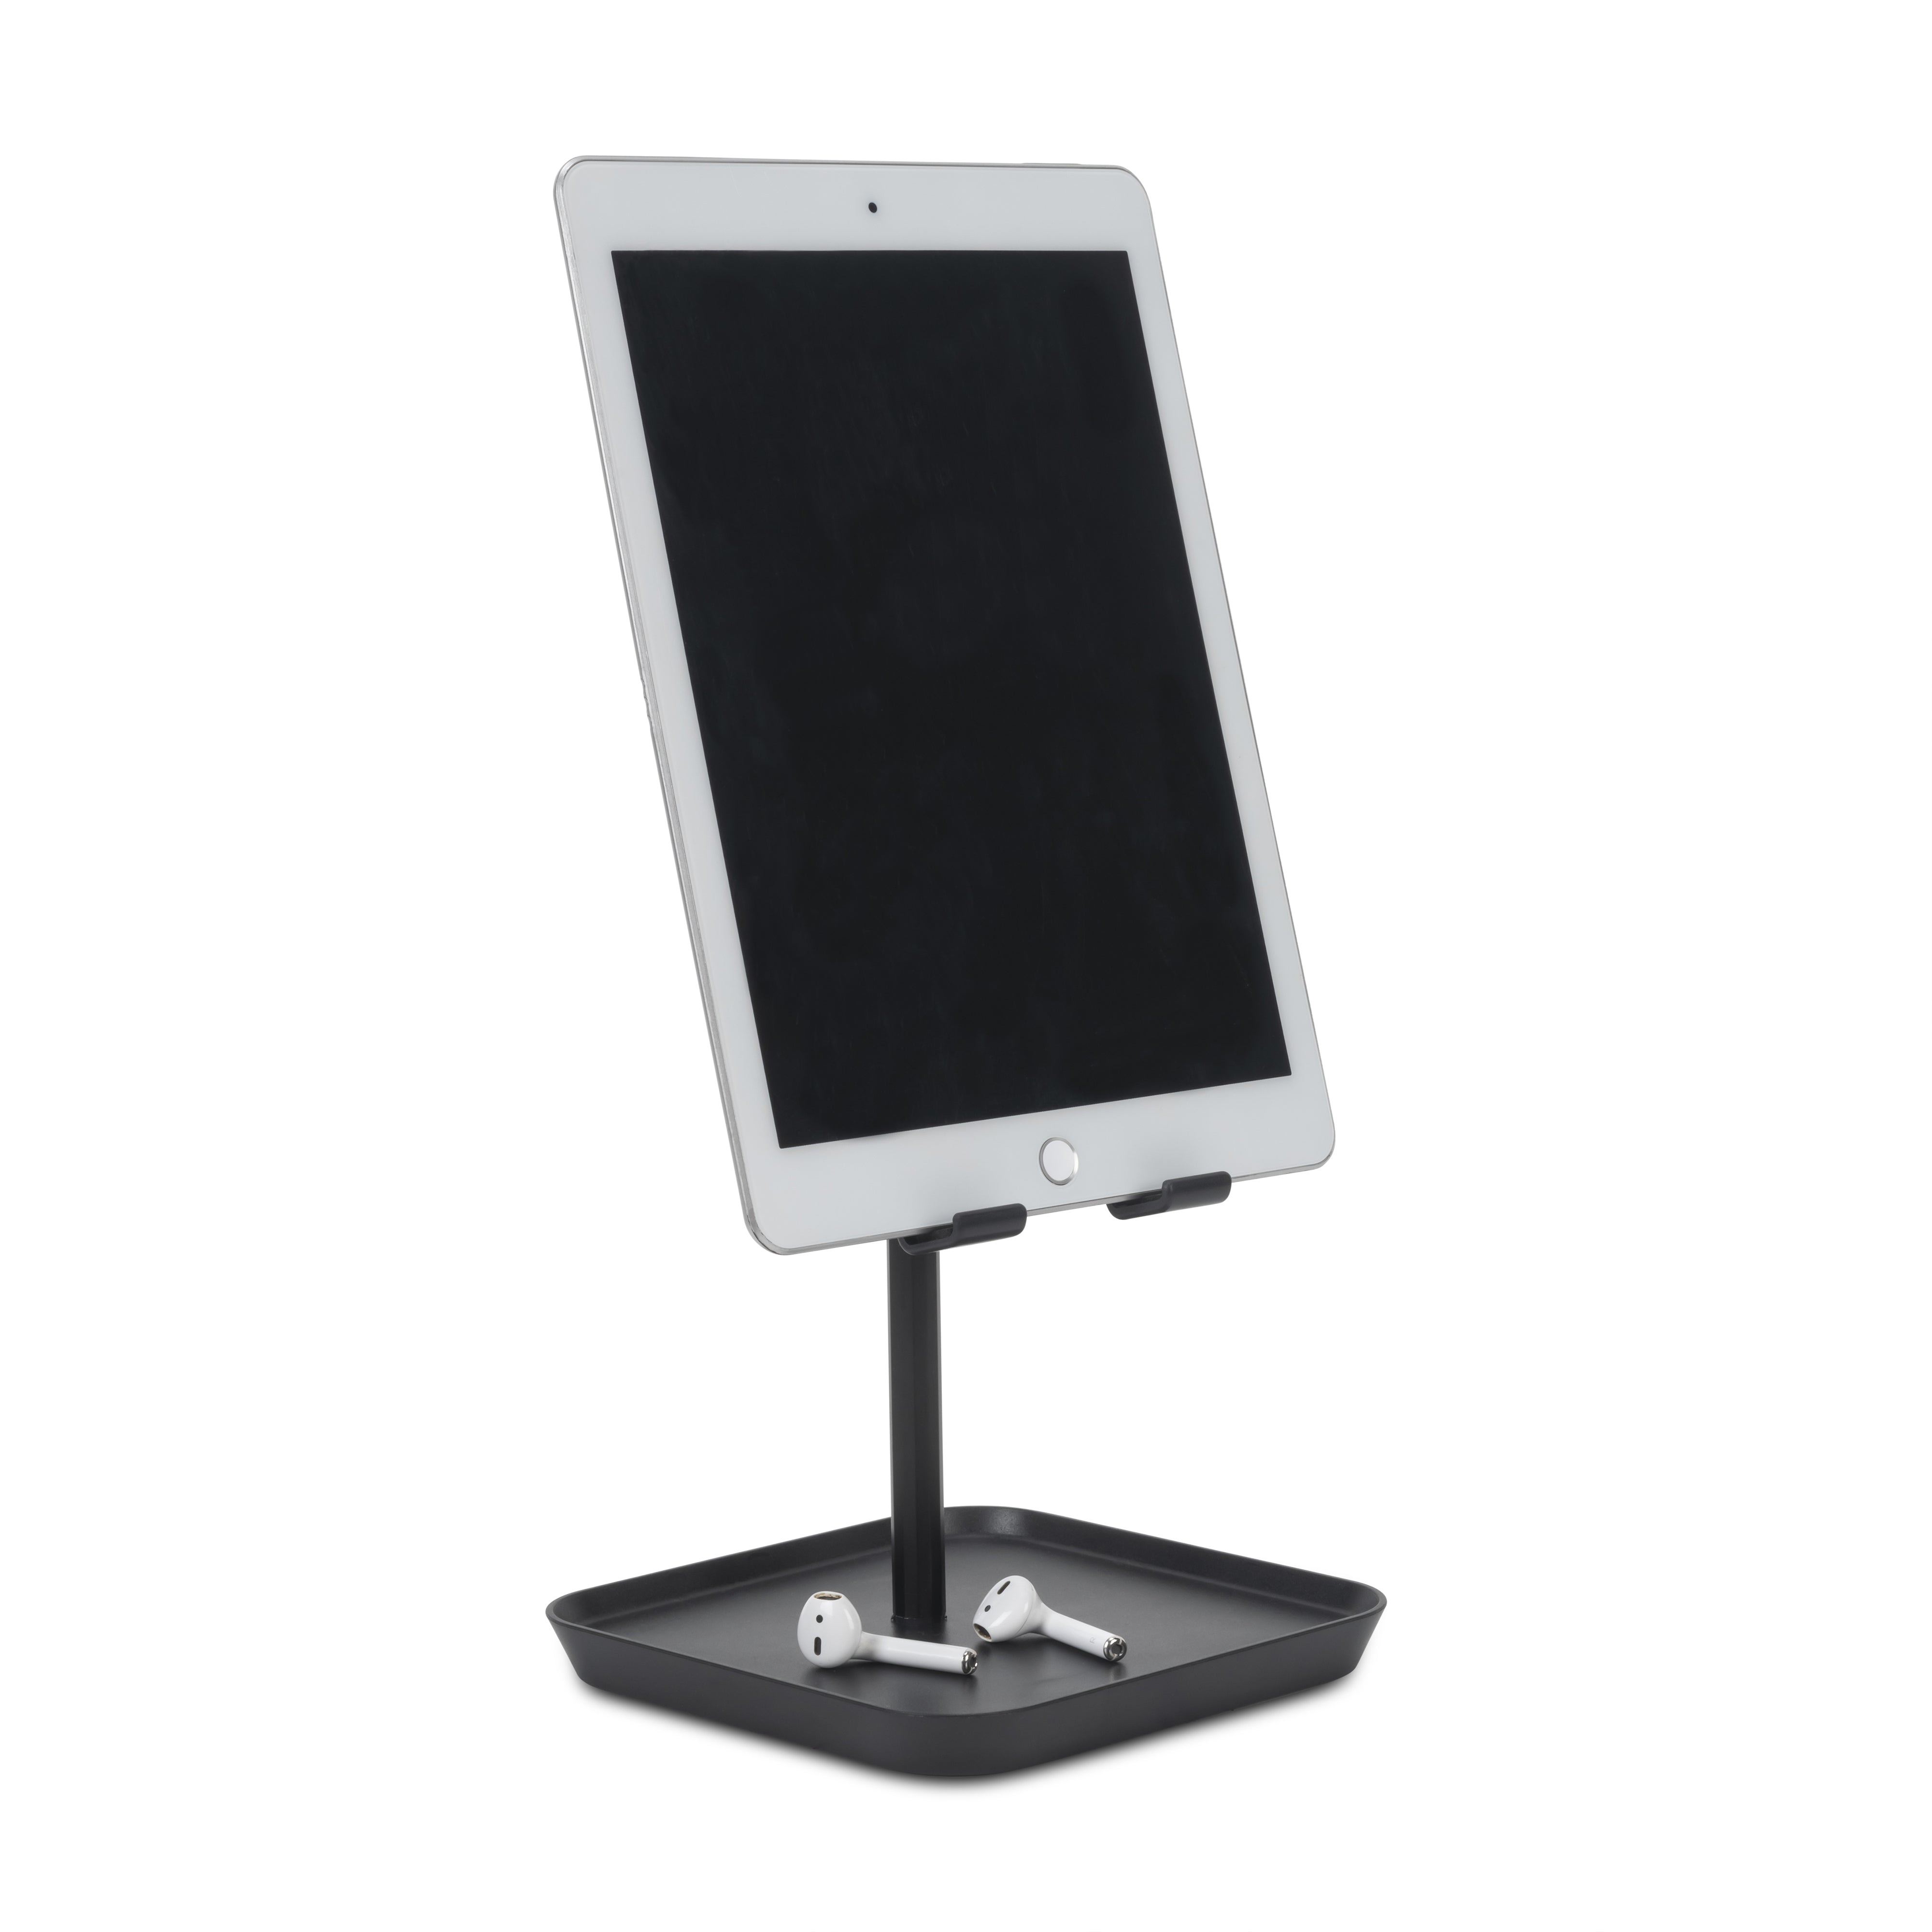 Cork Tablet Stand . Kindle Holder . Tabletop E-reader Stand . Base for  Ebook Reader . iPad Support . Tech Gift . Stand for Cooking / Reading 